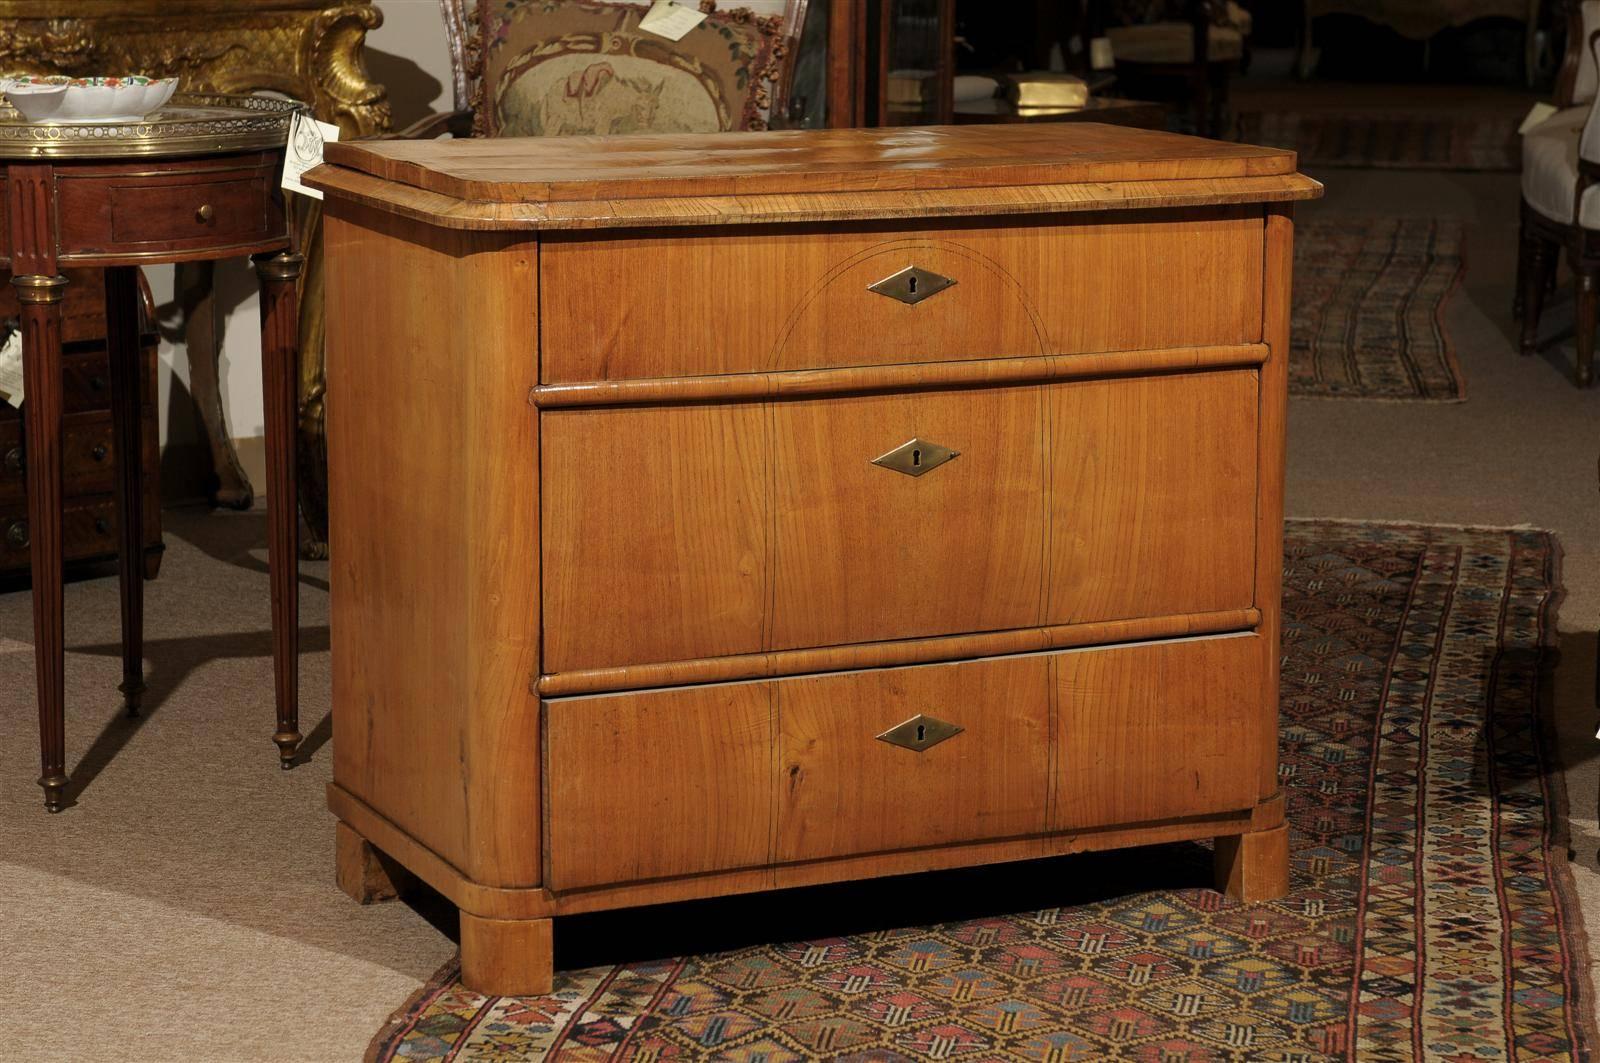 19th century petite Biedermeier commode in ash with three drawers and ebonized detail.